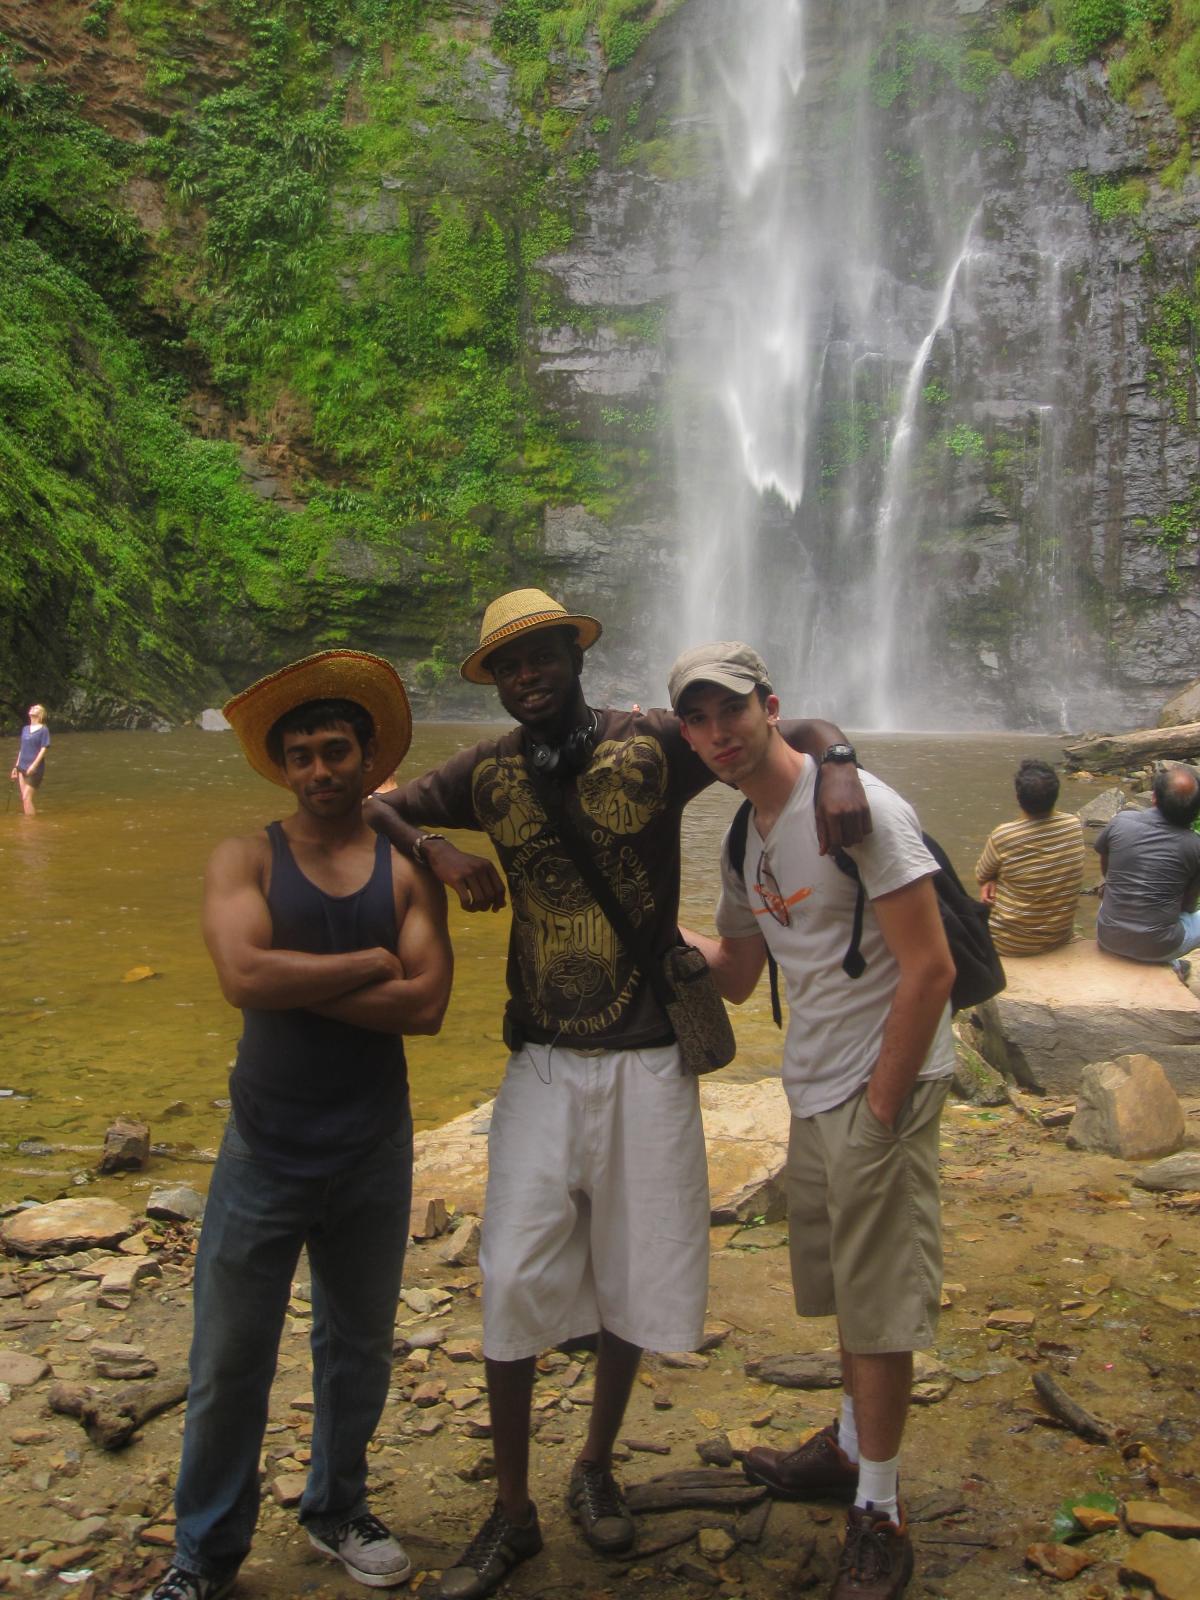 group photo in front of waterfall